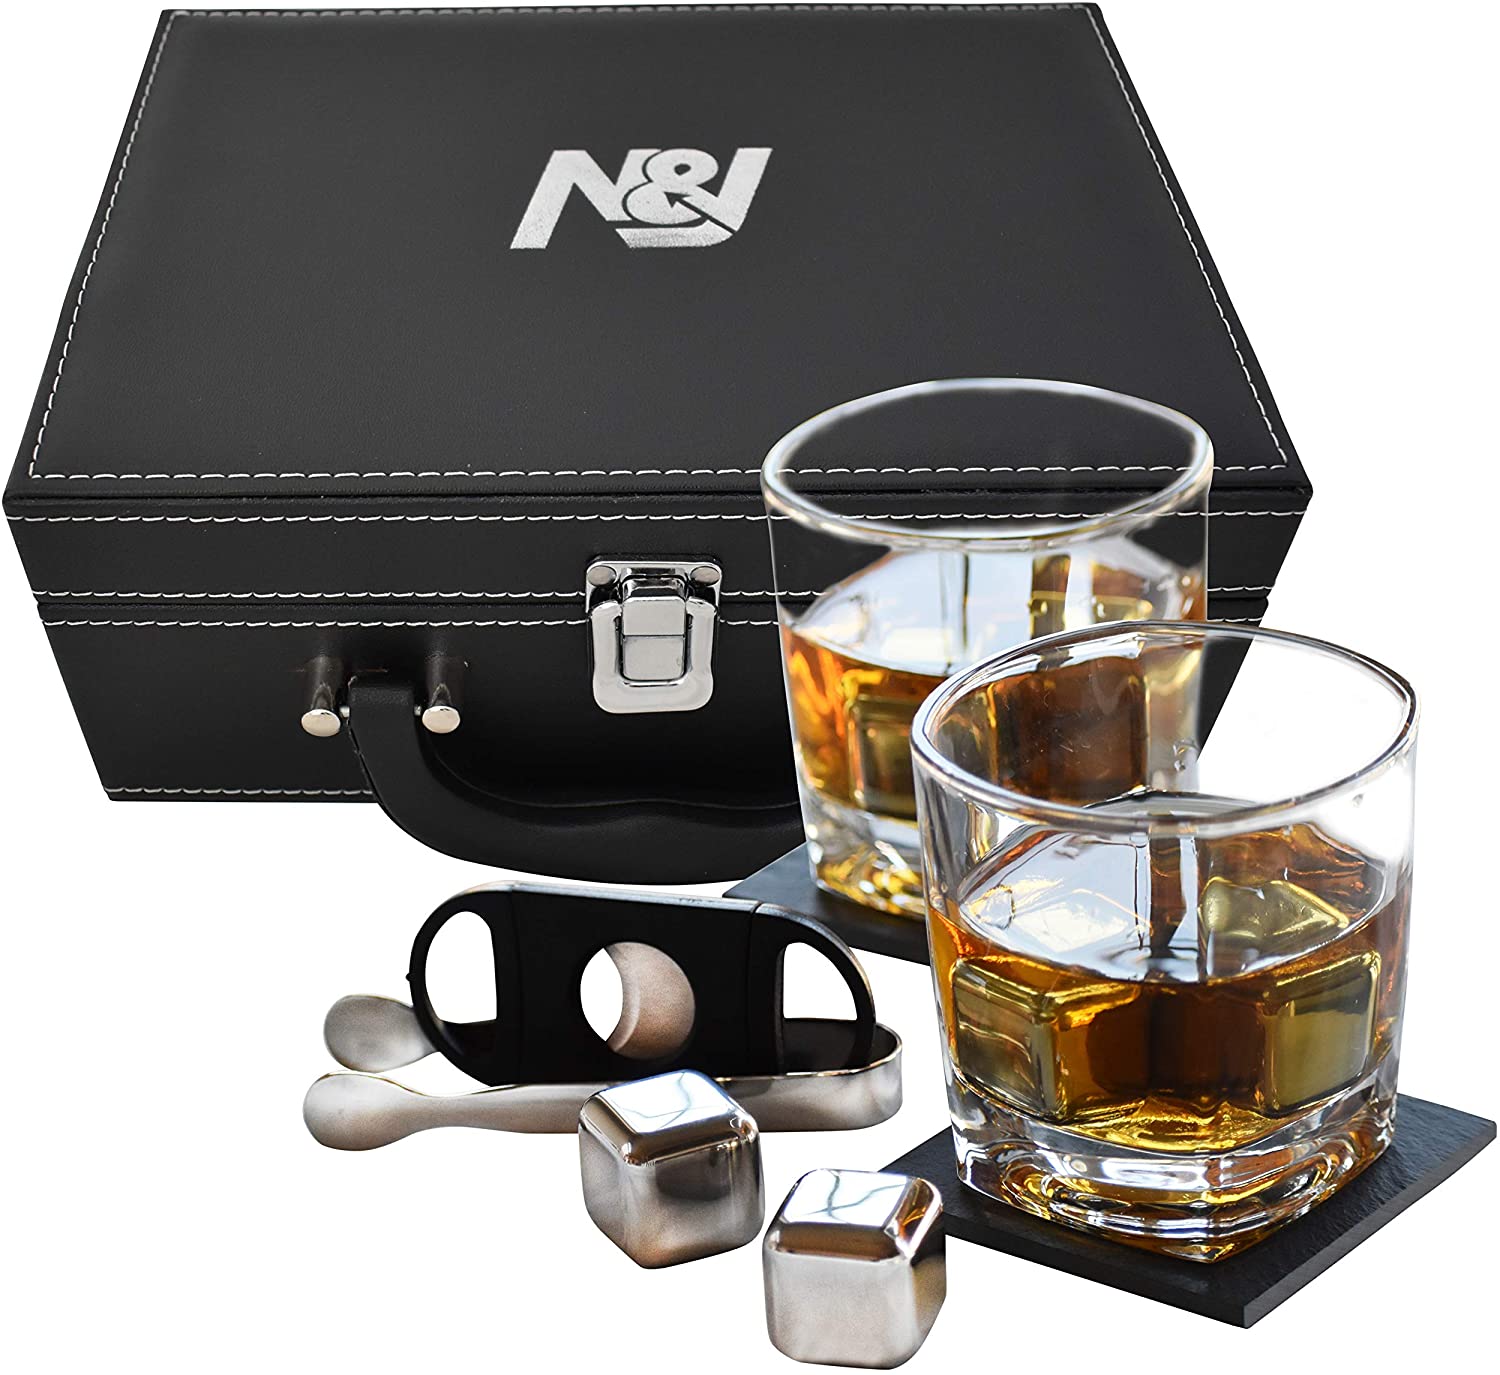 China Supplier Stone Wine Glasses - Father’s Day Gift Whisky Glass And Stone Set 2 Large Square Whiskey Glasses stainless steel Whisky Rocks Chilling Stones In Leather Box – Shunstone